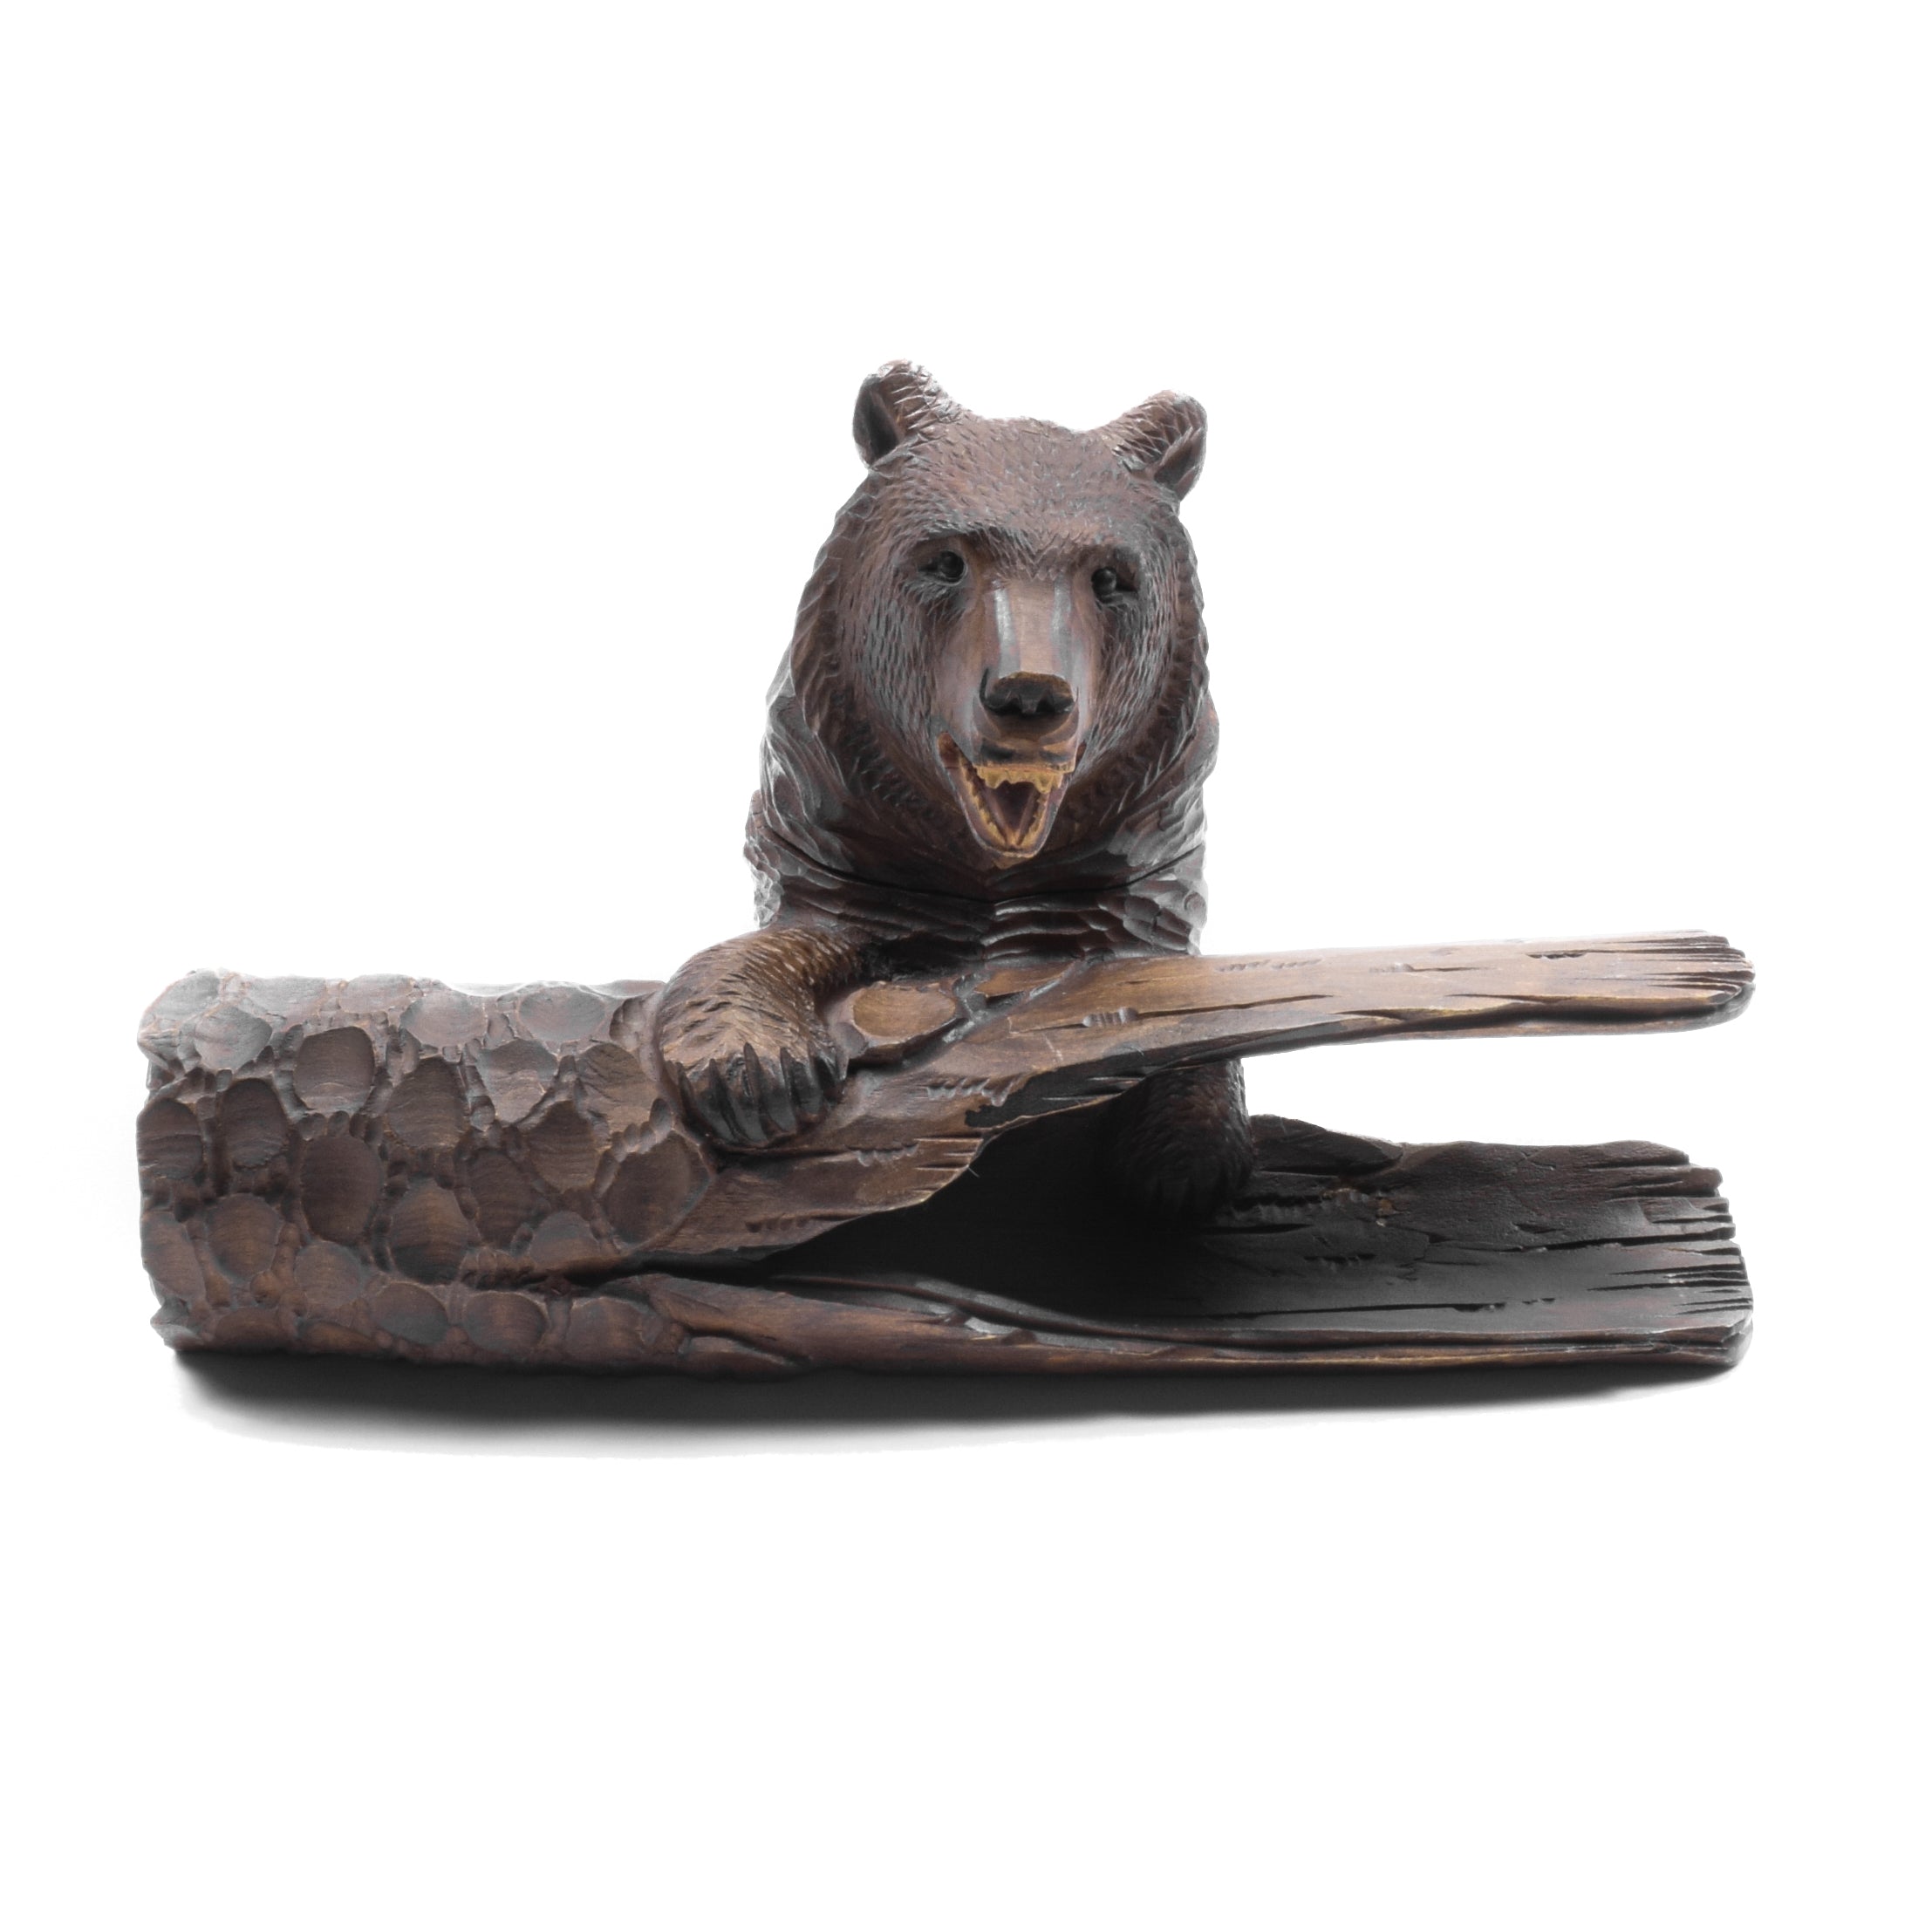 Bear Pen and Inkwell, Furnishings, Black Forest, Other